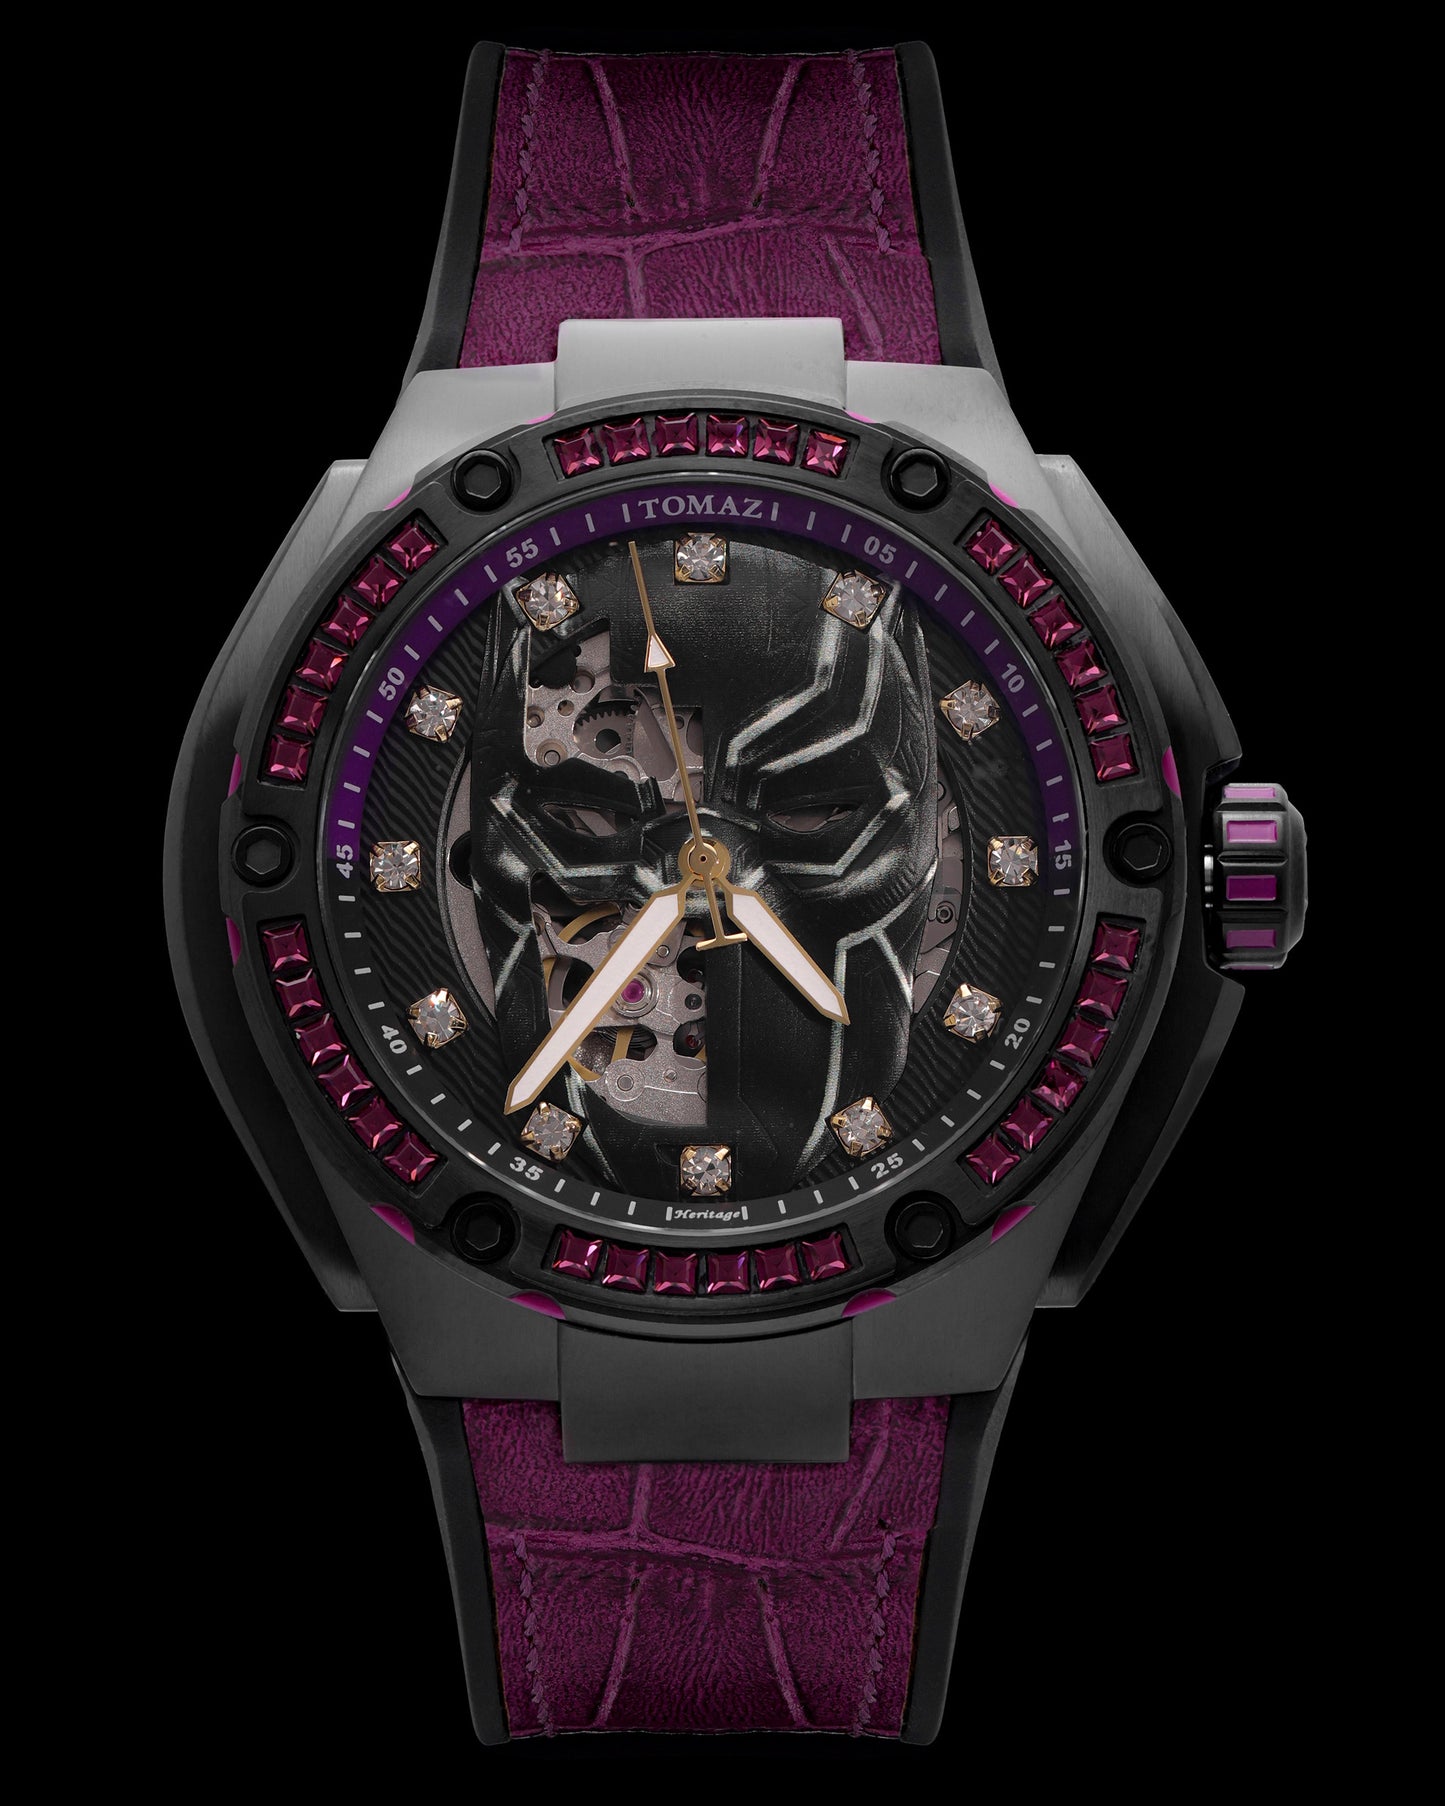 Marvel Black Panther TW037K-D1 (Metal Gun/Black) with Purple Swarovski Crystal (Purple Silicone with Leather Bamboo Strap)